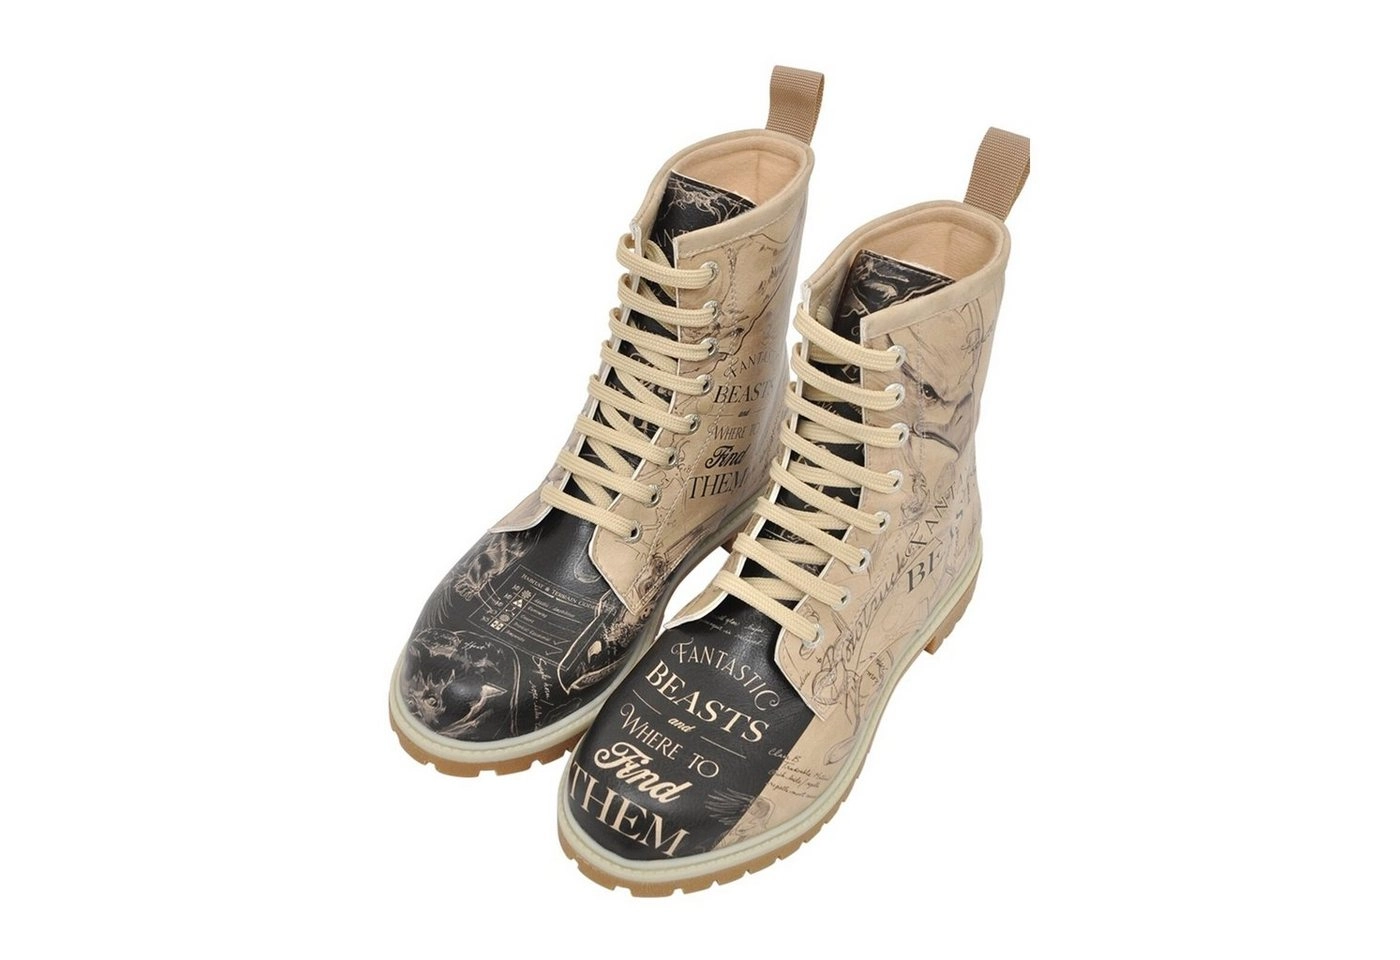 DOGO »I want to be a Wizard Fantastic Beasts« Stiefel Vegan